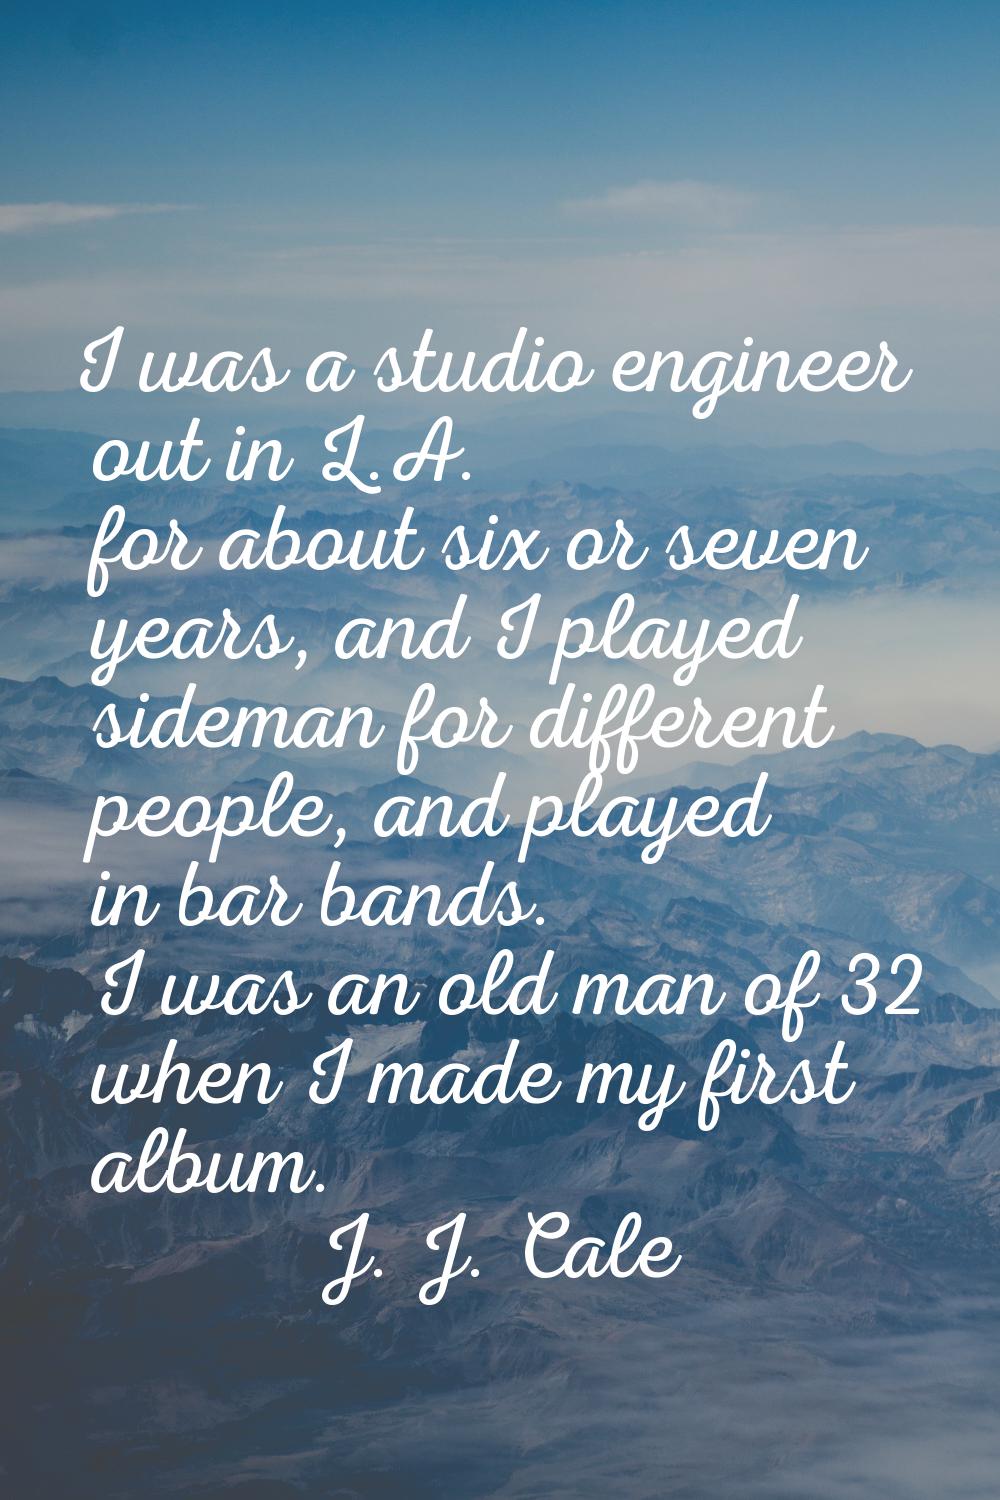 I was a studio engineer out in L.A. for about six or seven years, and I played sideman for differen